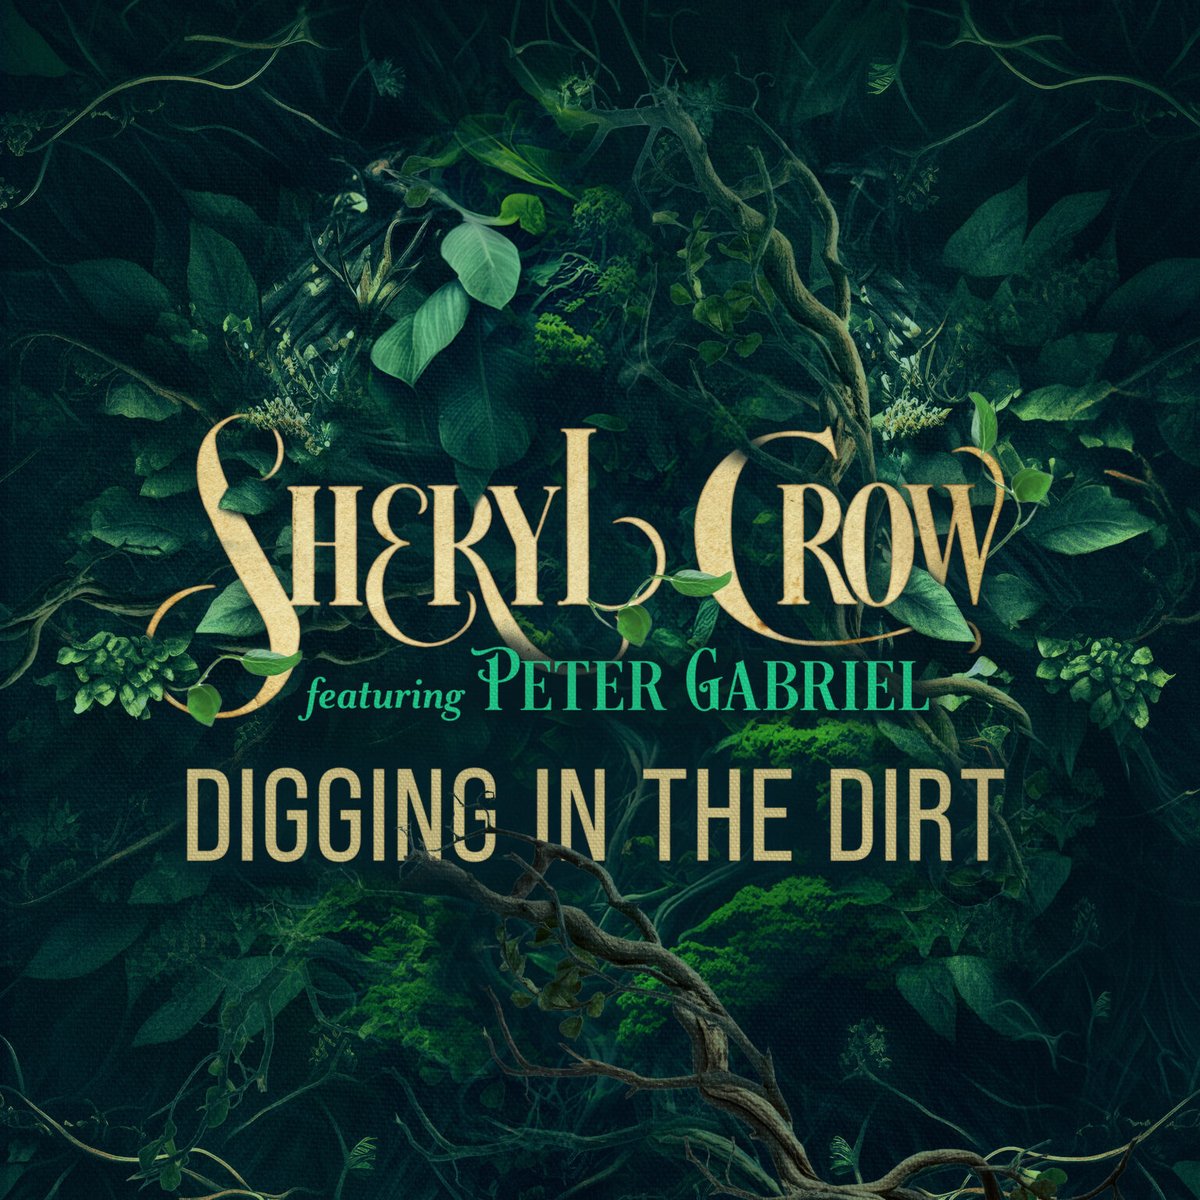 HAVE YOU HEARD Sheryl's new cover of the #PeterGabriel classic 'Digging In The Dirt' yet? Peter himself sings on it - check out Mr. Gabriel's thoughts on Sheryl's rendition of his song (and listen!) here: petergabriel.com/news/digging-i… Team Sheryl